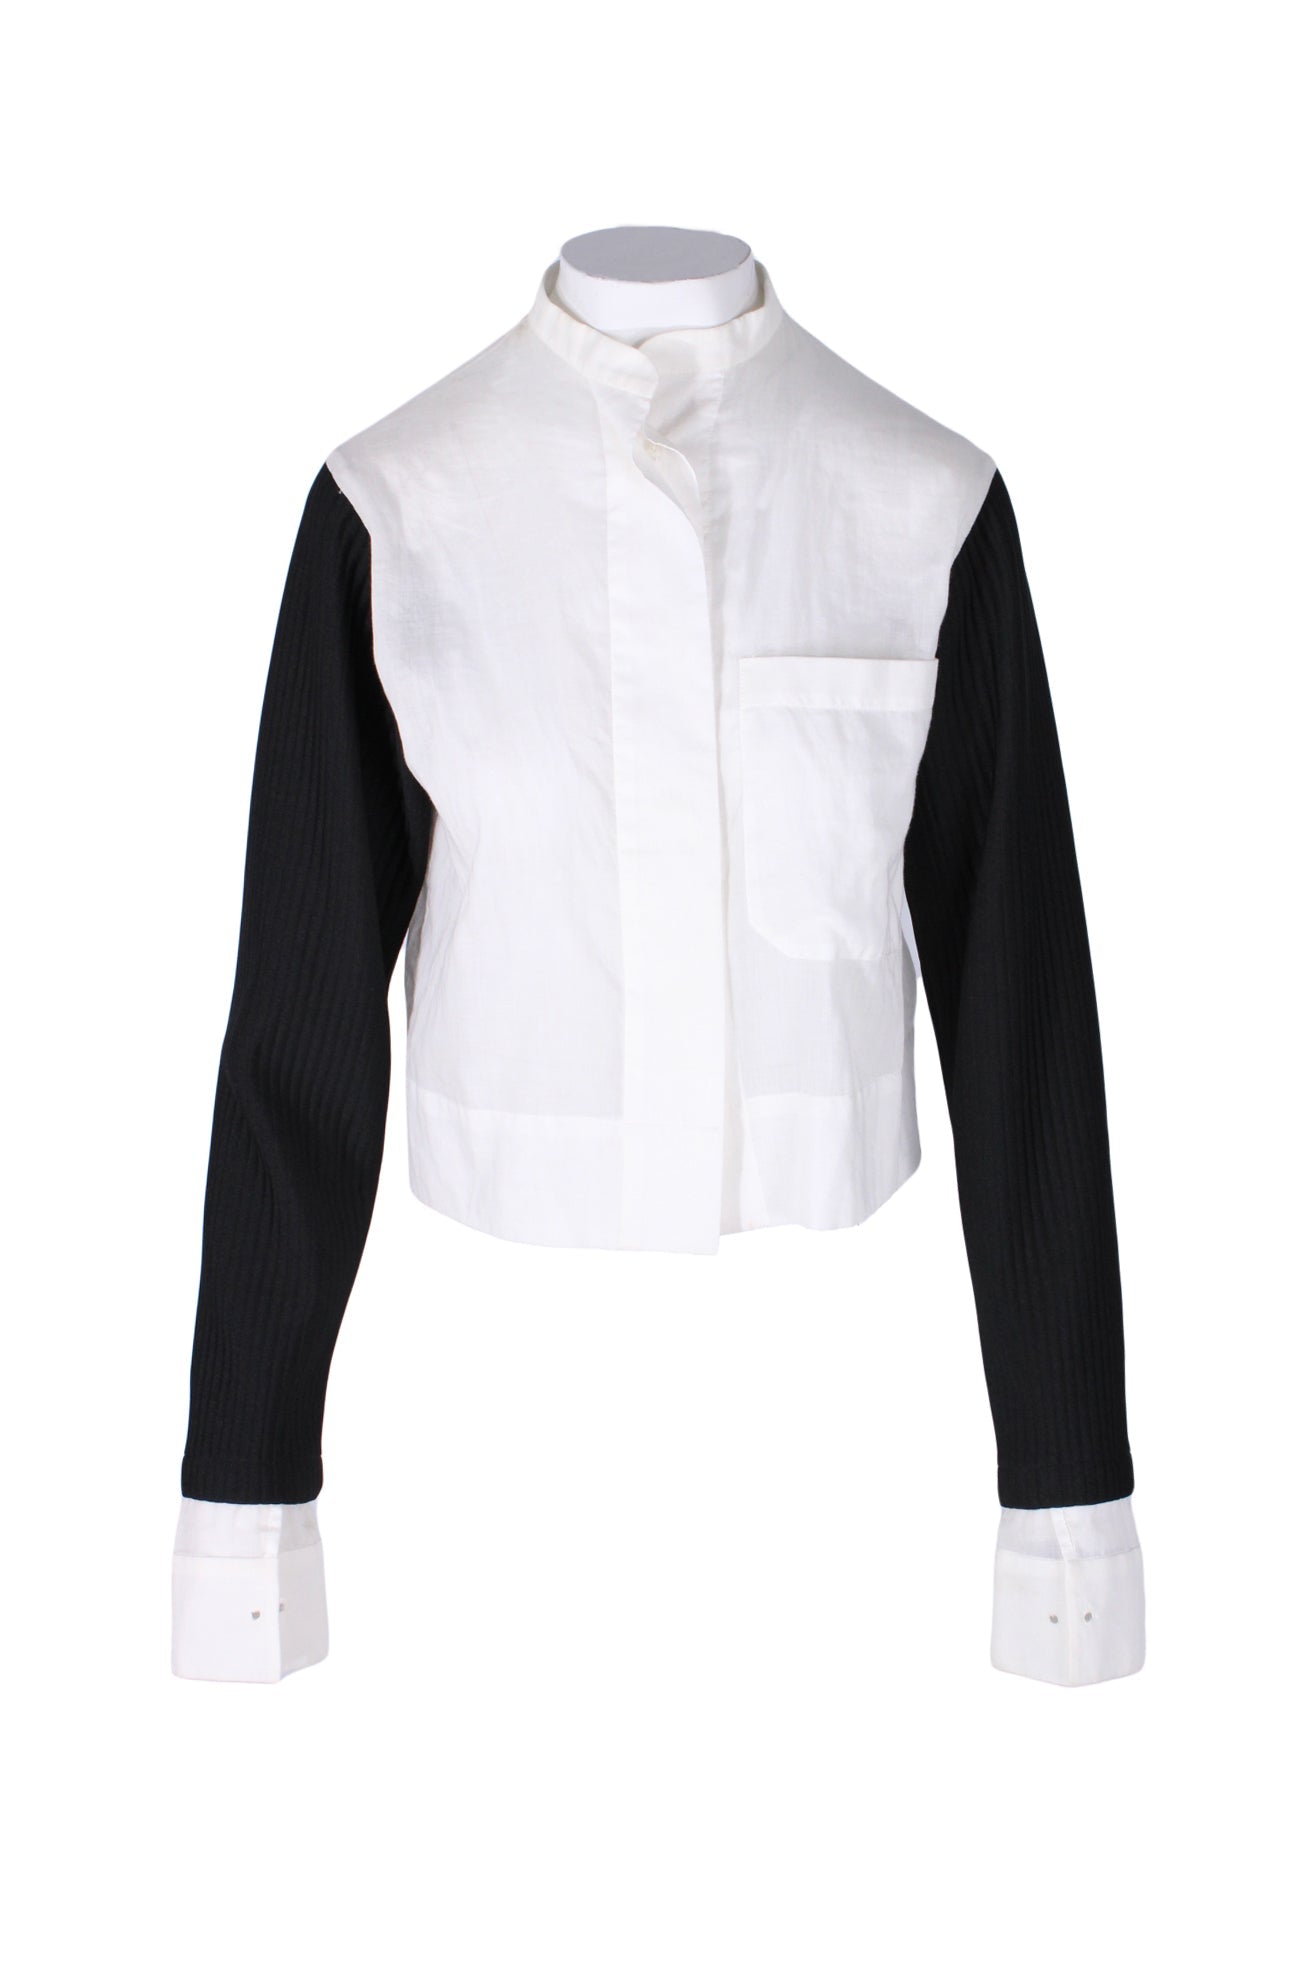  front angle index black and white long sleeve stylized top on feminine mannequin torso featuring semi-sheer woven main & french cuffs, contrast rib knit sleeves, overlapping band collar, chest patch pocket, and concealed front button closure.